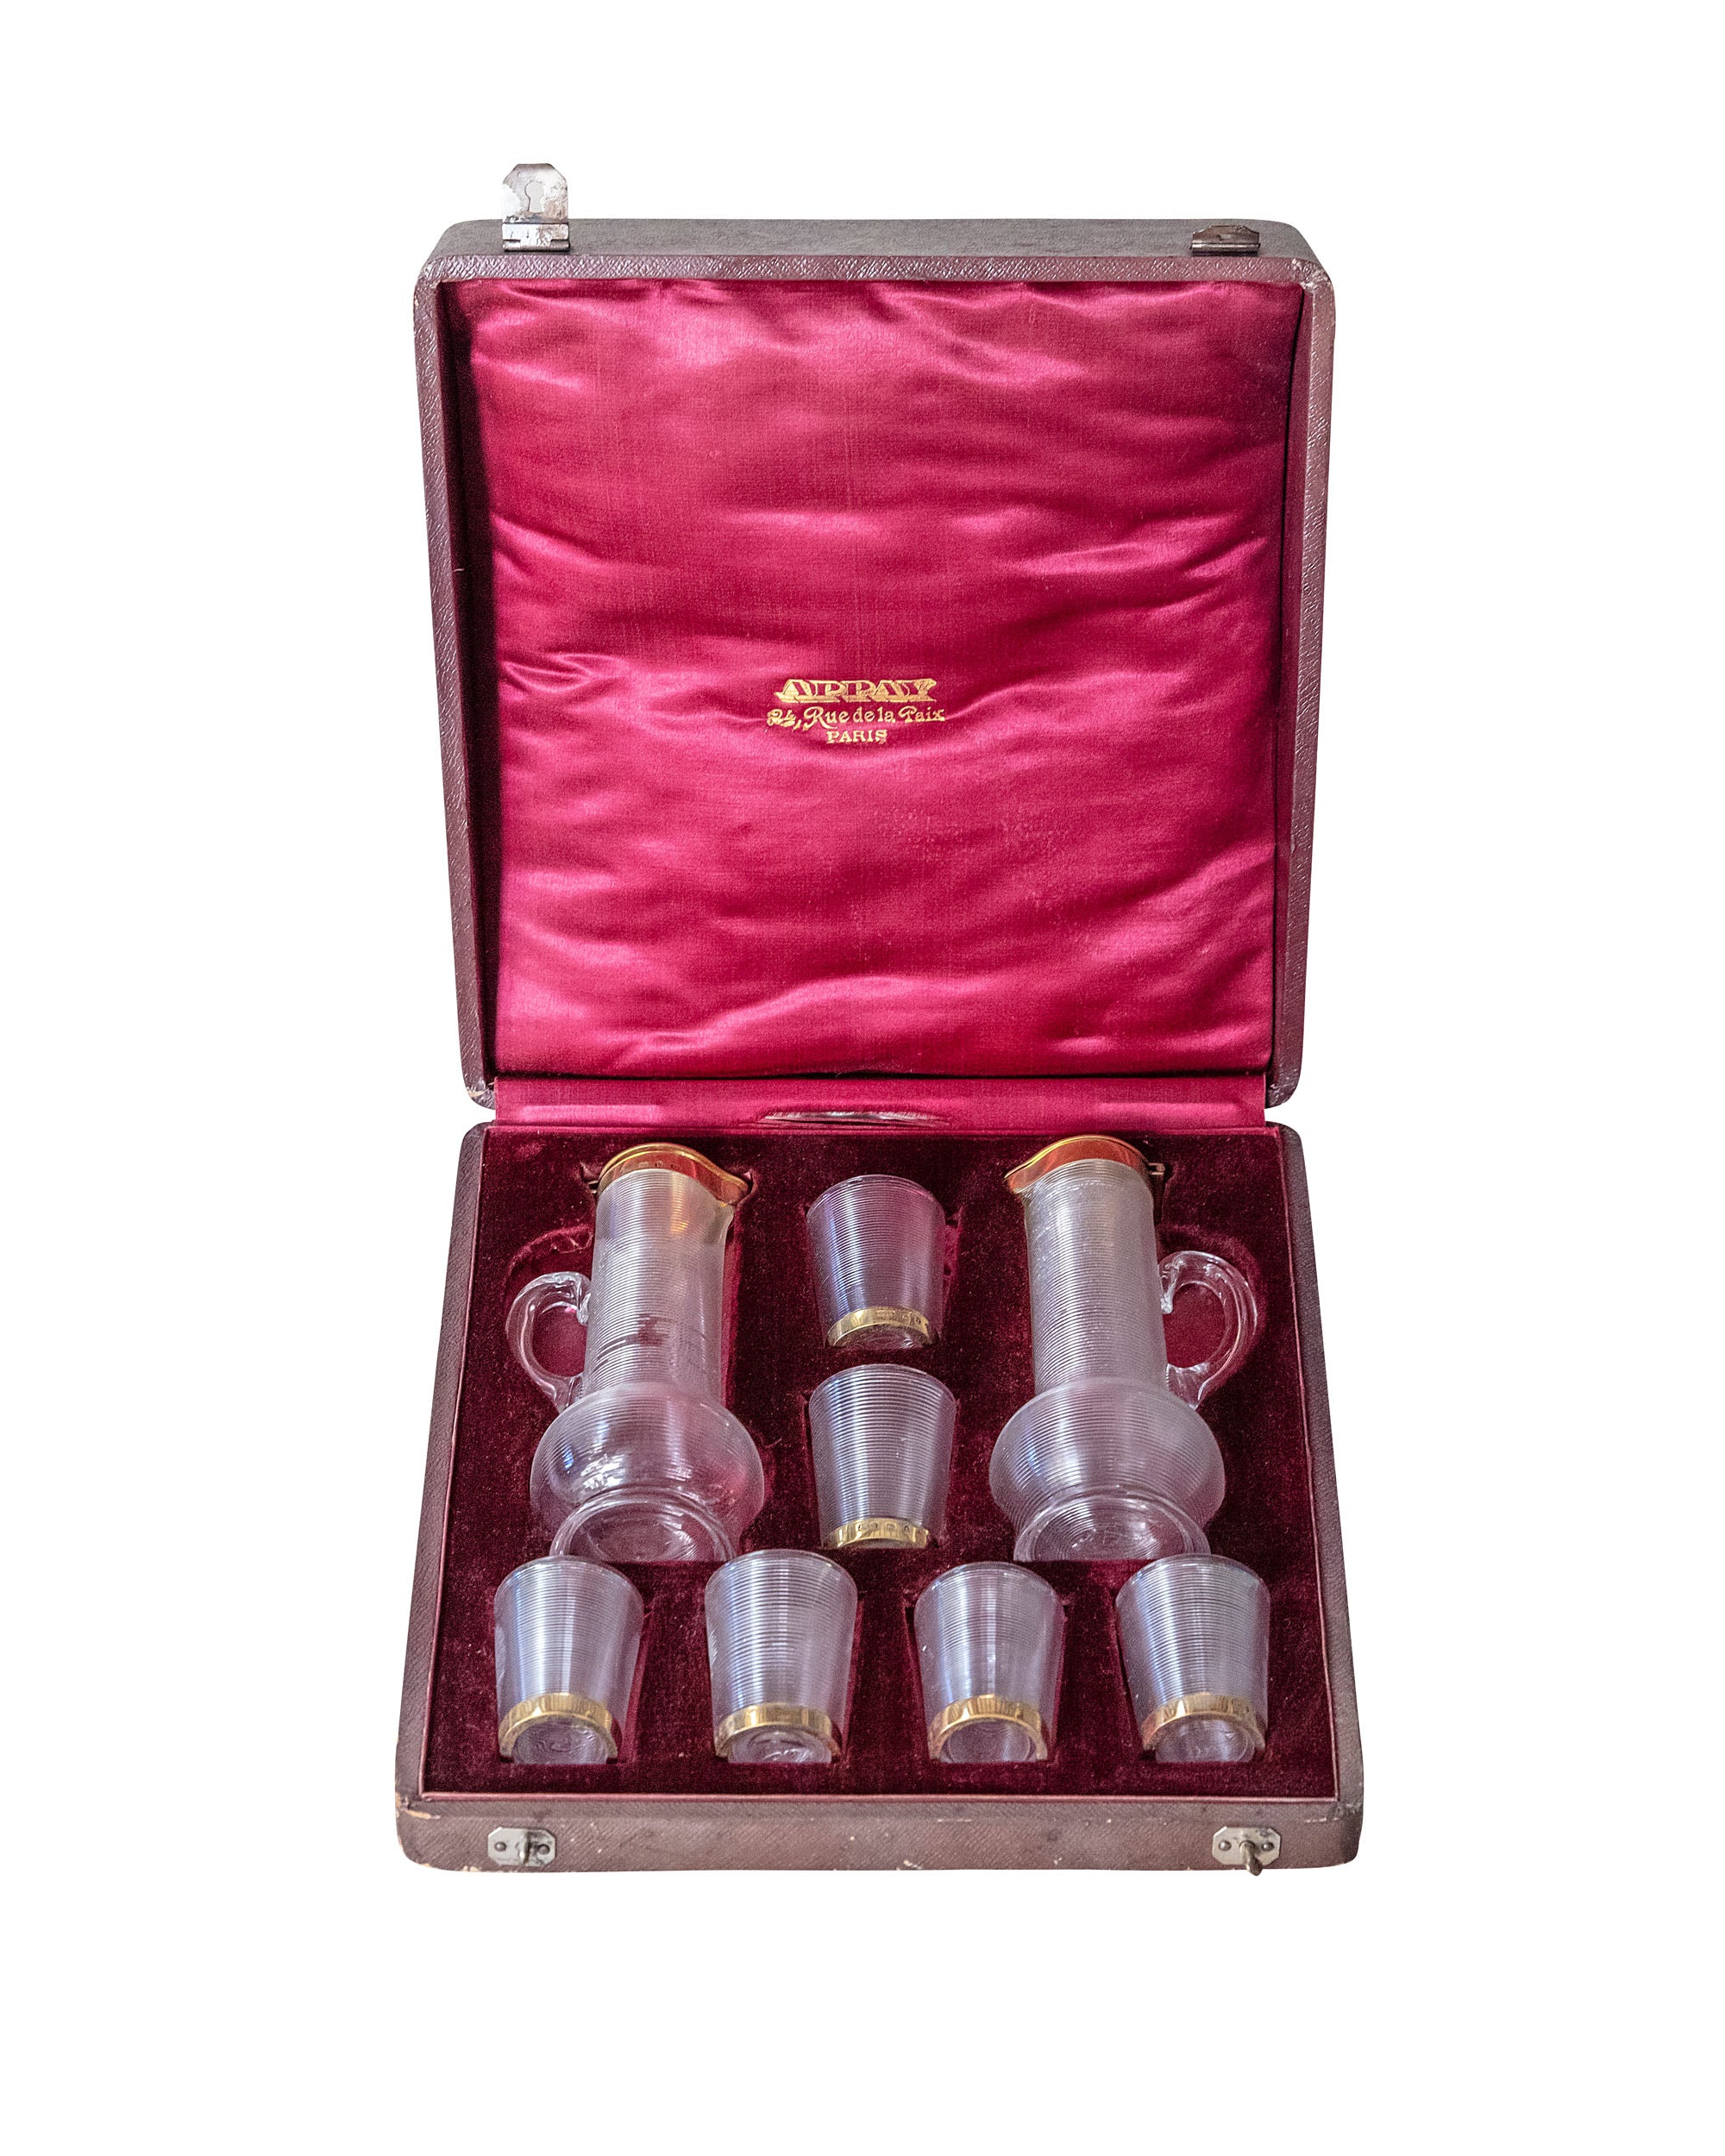 Aspay house liquor set consisting of two jugs and six Bacarrat glasses with golden edge. All in a leather case with original velvet